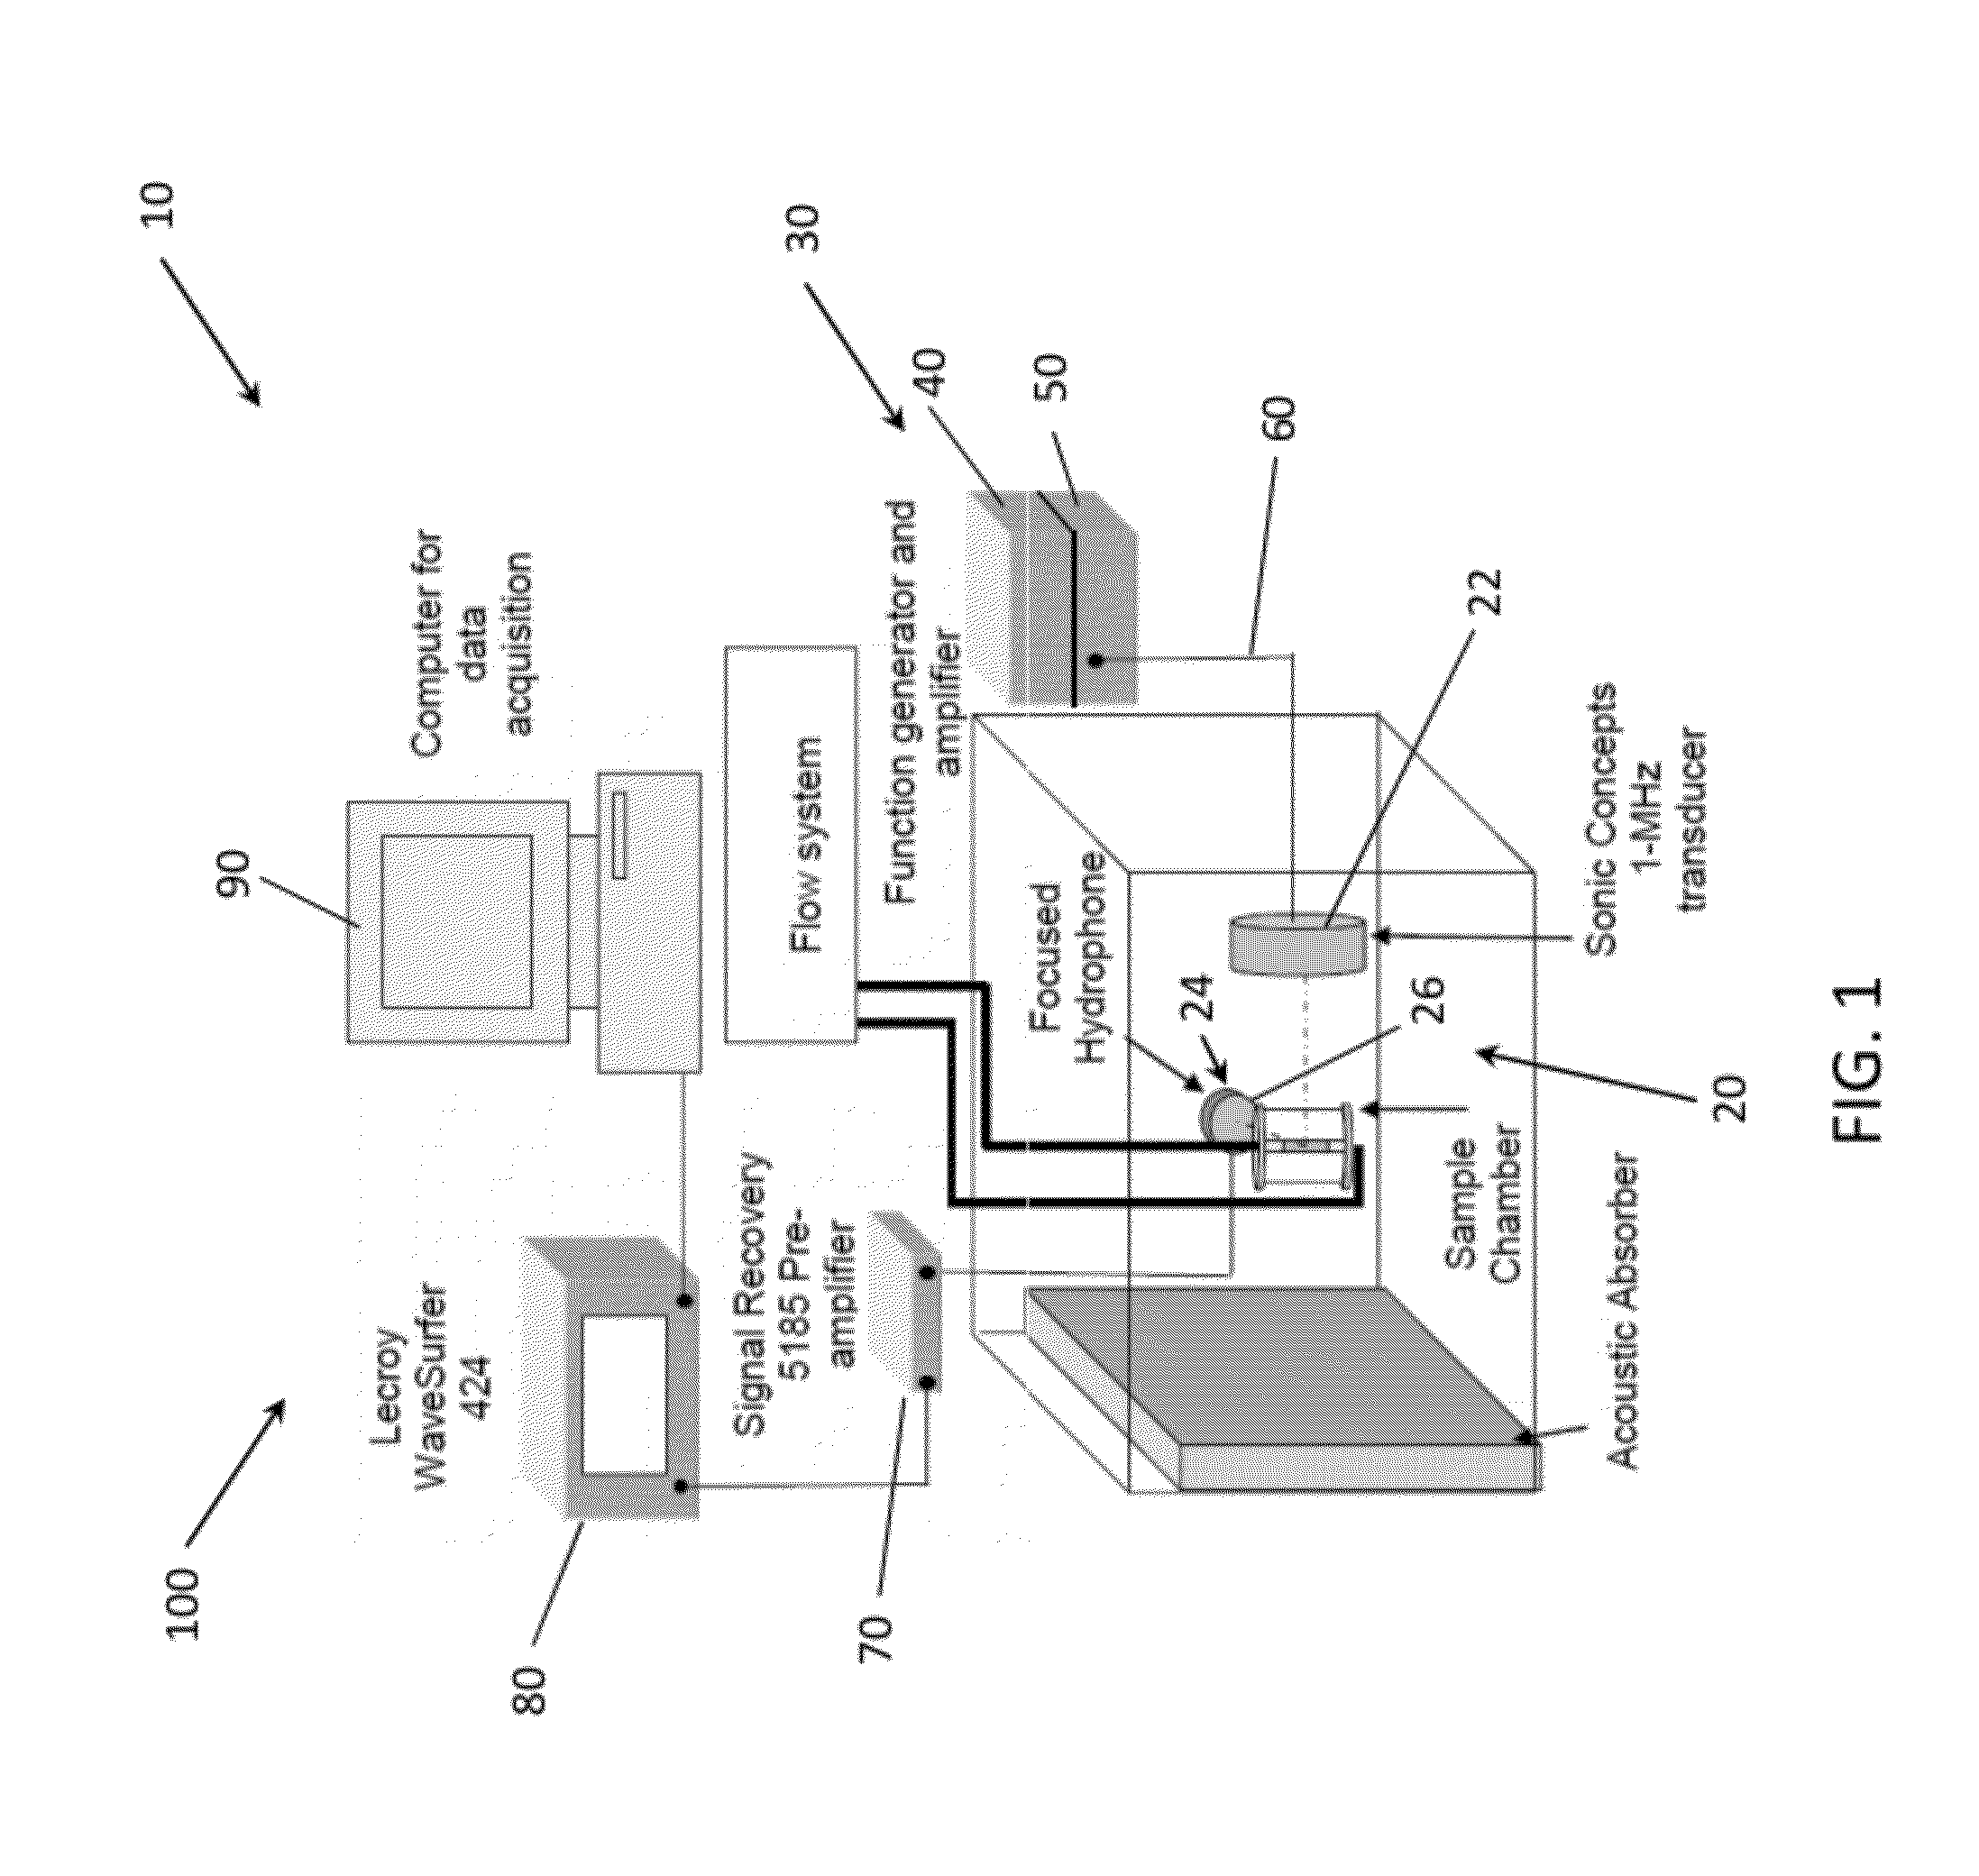 Methods of Enhancing Delivery of Drugs Using Ultrasonic Waves and Systems for Performing The Same